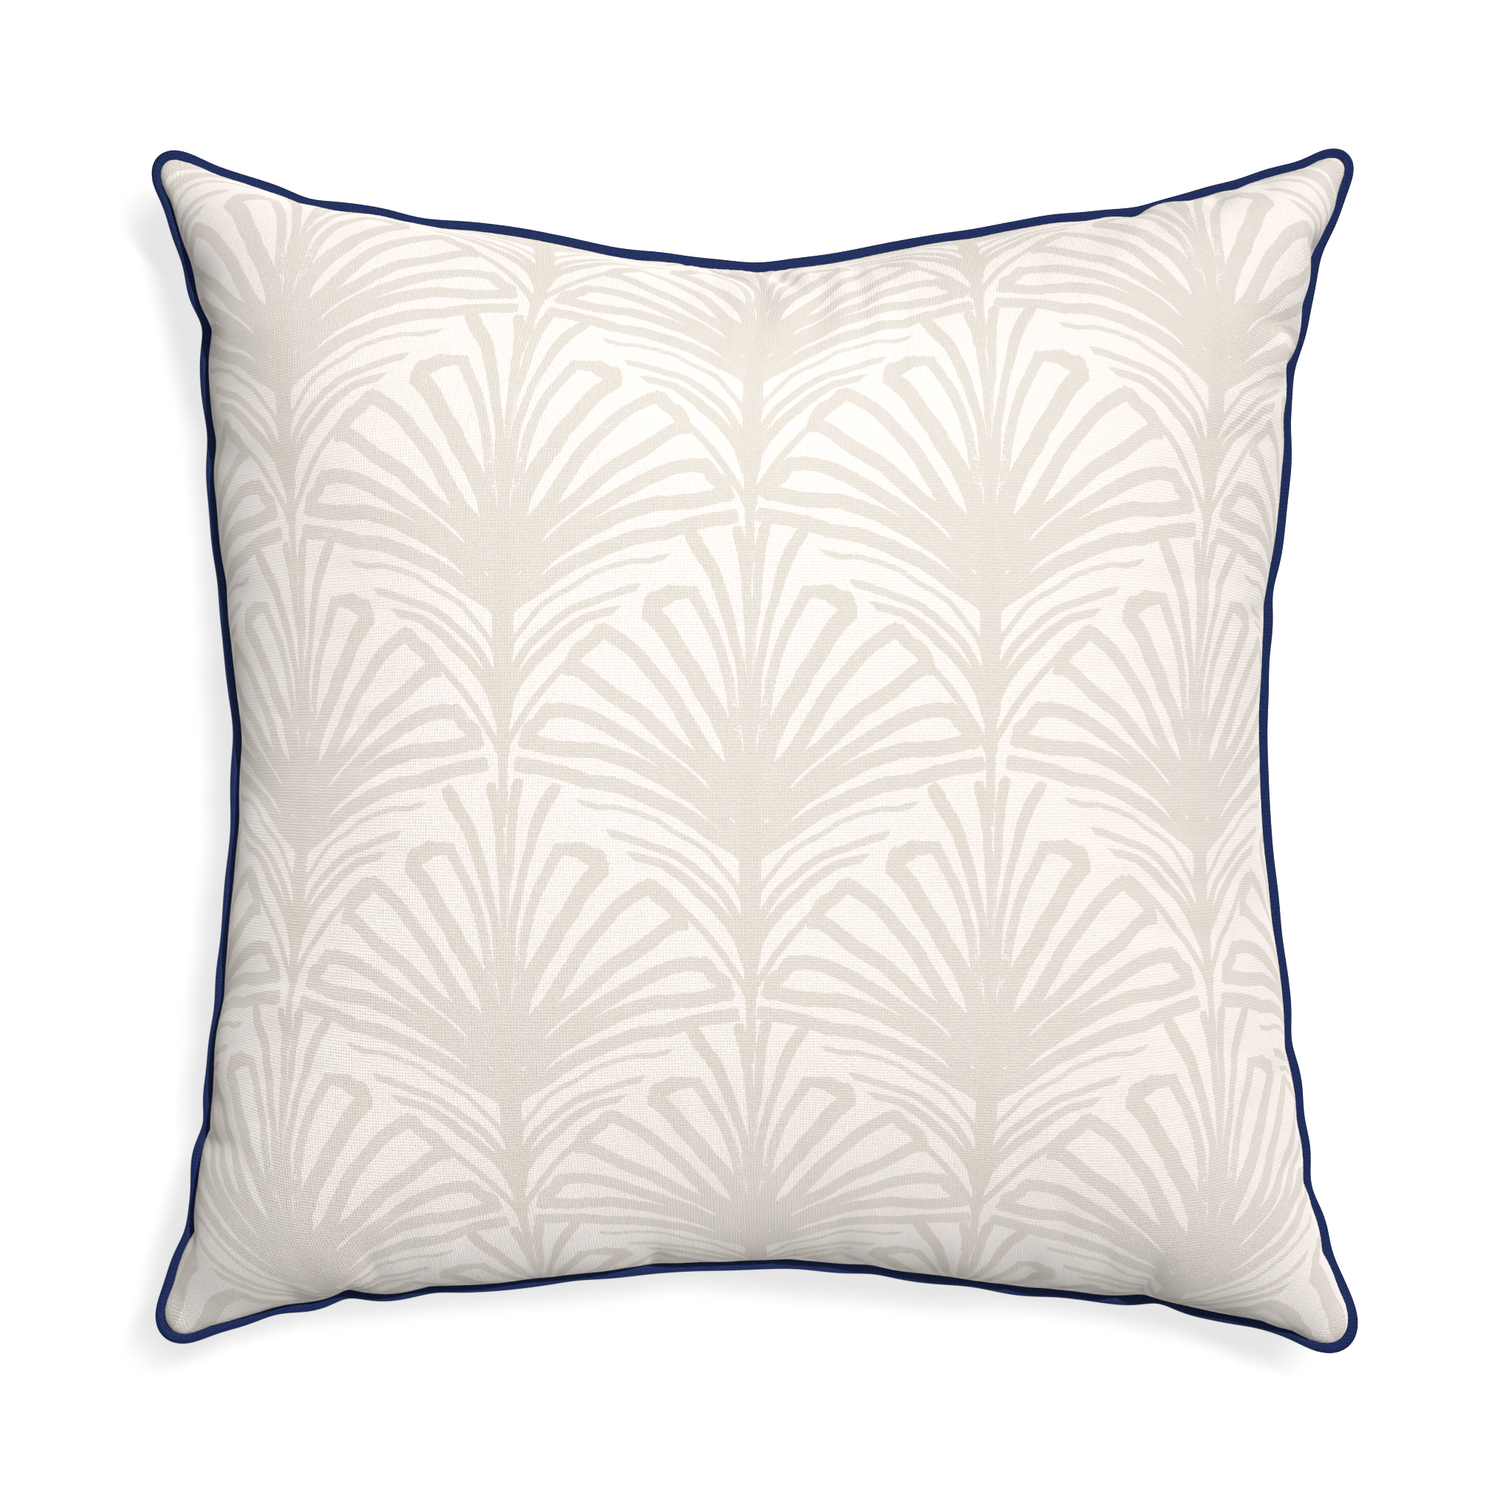 Euro-sham suzy sand custom pillow with midnight piping on white background